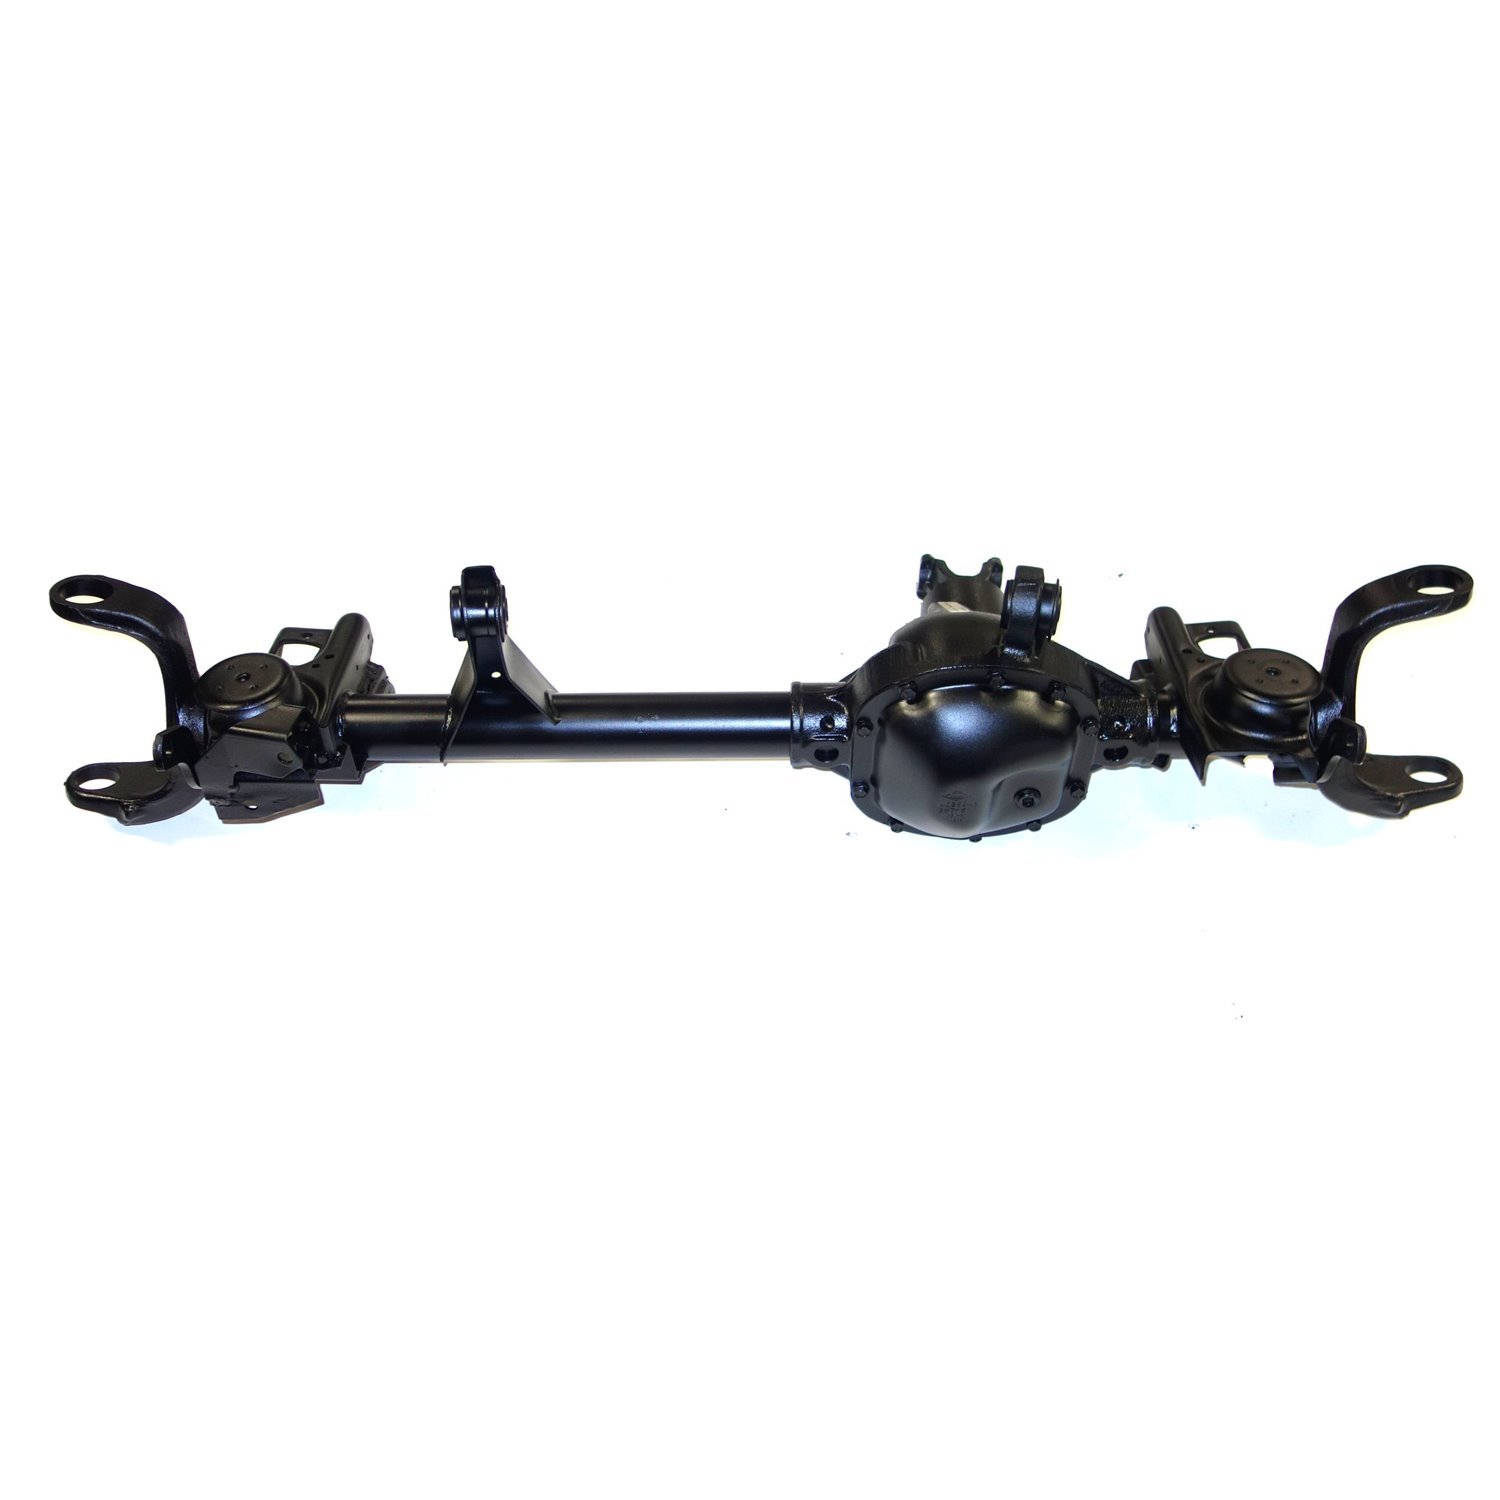 Remanufactured Complete Axle Assy for Dana 30 1998 Grand Cherokee 3.55 with 242 T-Case